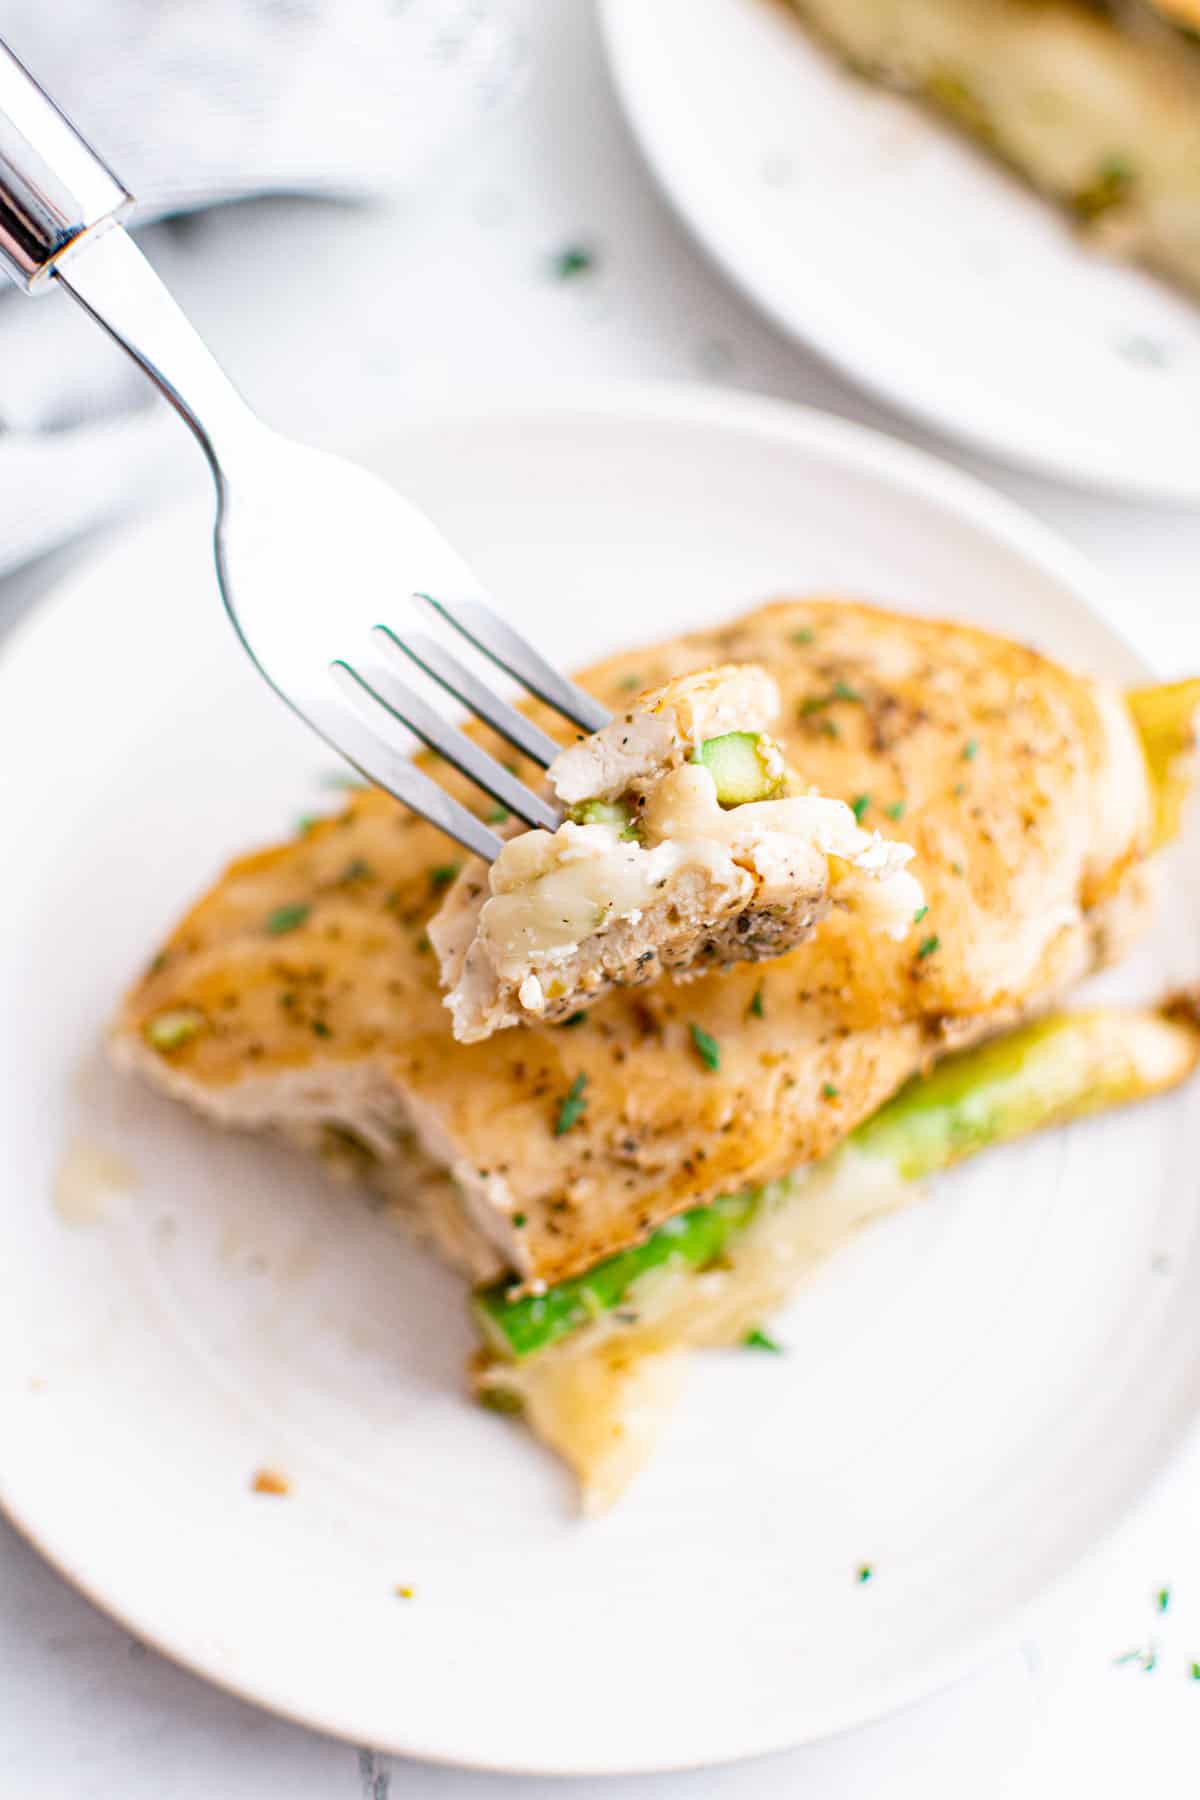 Instant Pot Stuffed Chicken Breast is stuffed with cheese and asparagus for a mouth-watering delectable one-pot dinner that you'll want to make again and again! Making stuffed chicken breast Instant Pot style is surprisingly quick and simple, so it's just the thing for easy weeknight dinners or weekly;y meal prep. This versatile dish is low carb and gluten free too. Click through to get this awesome stuffed chicken breast in Instant Pot recipe!! #instantpot #stuffedchickenbreast #chickenrecipesNon Traditional Thanksgiving Dinner Ideas